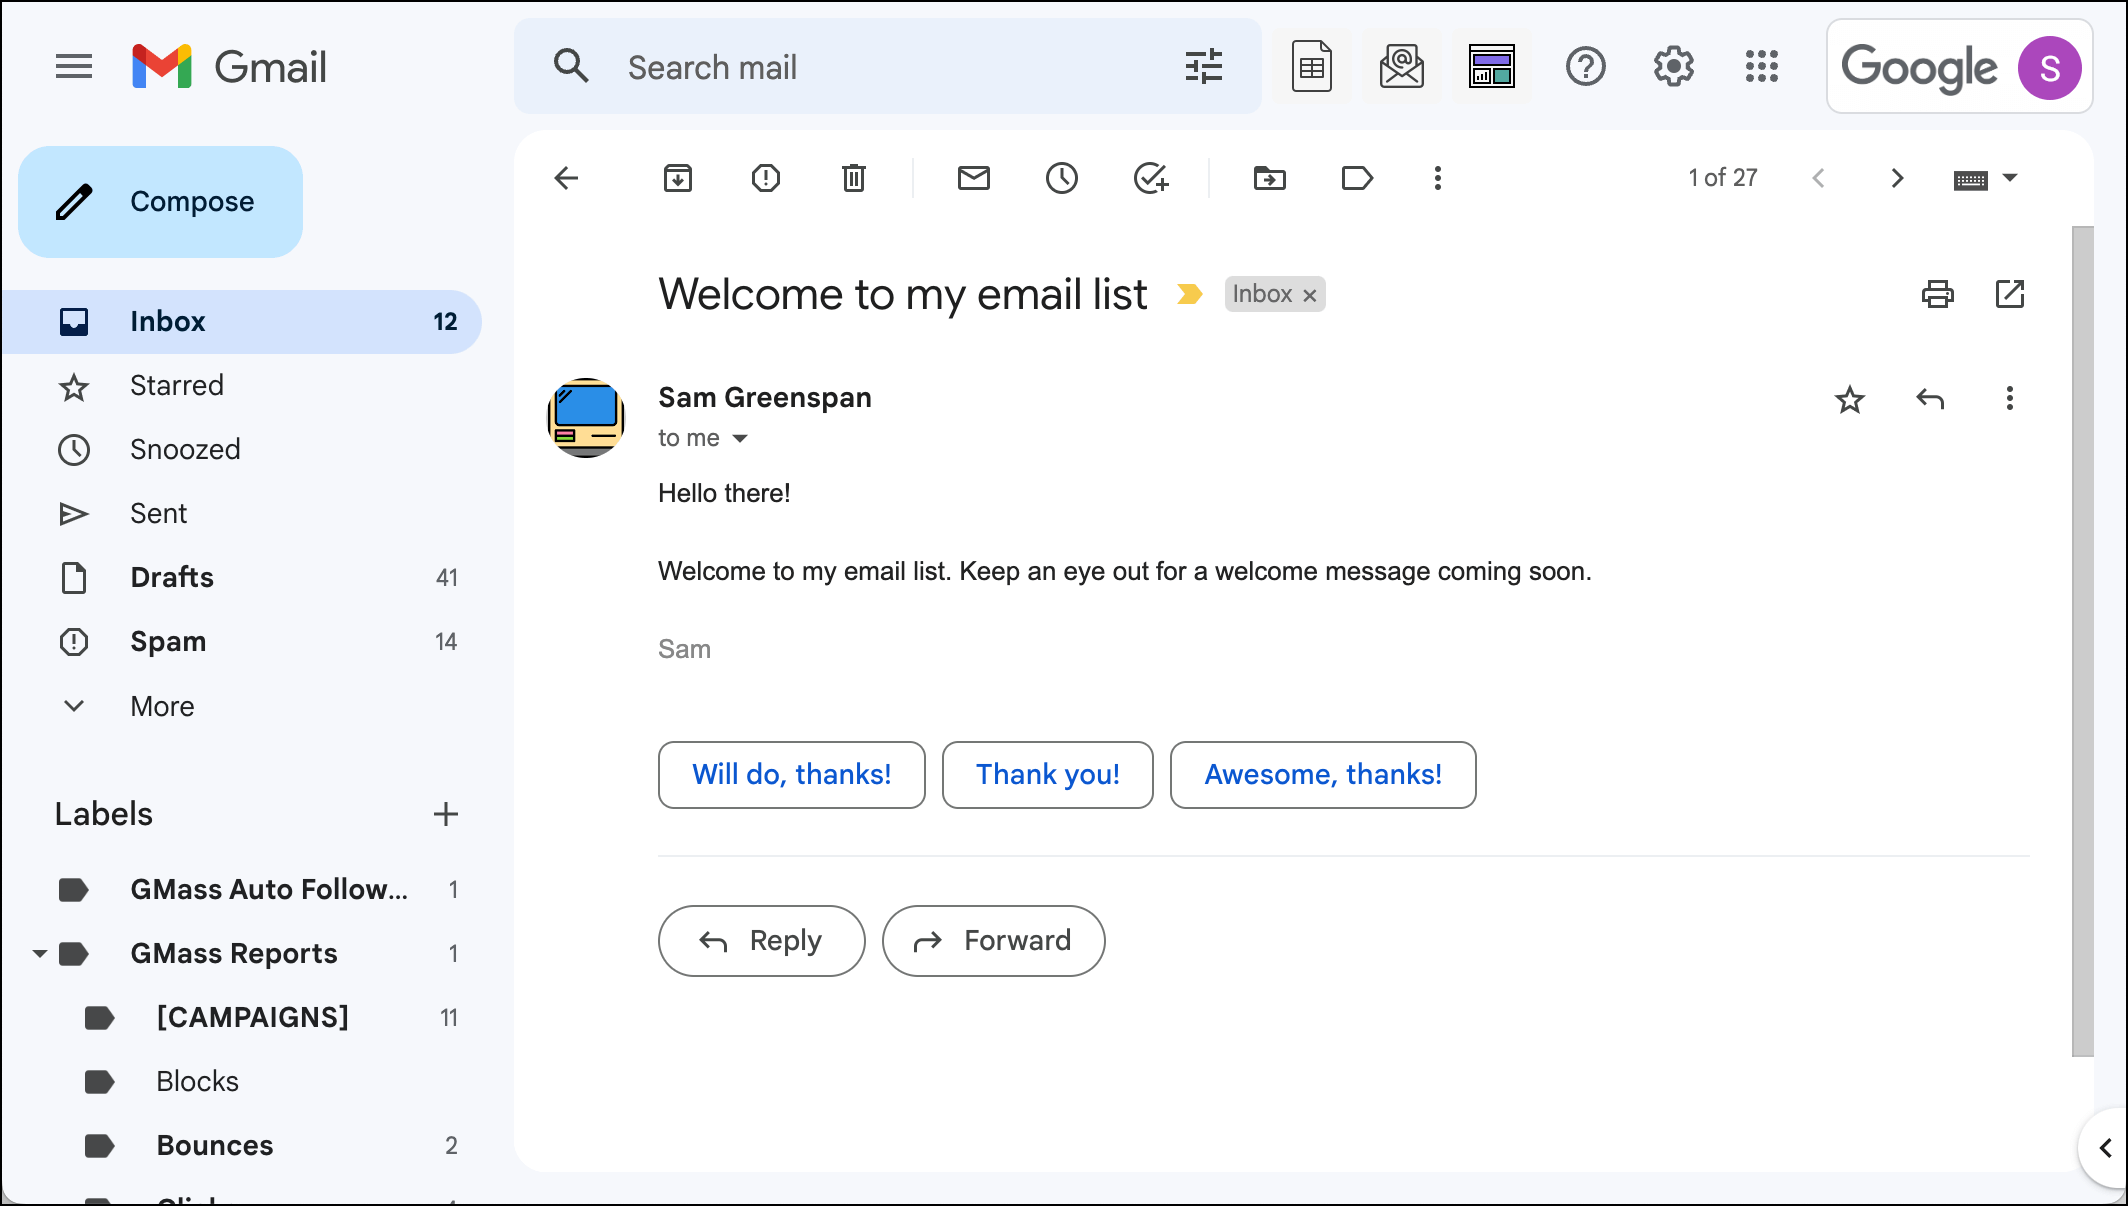 There's your email